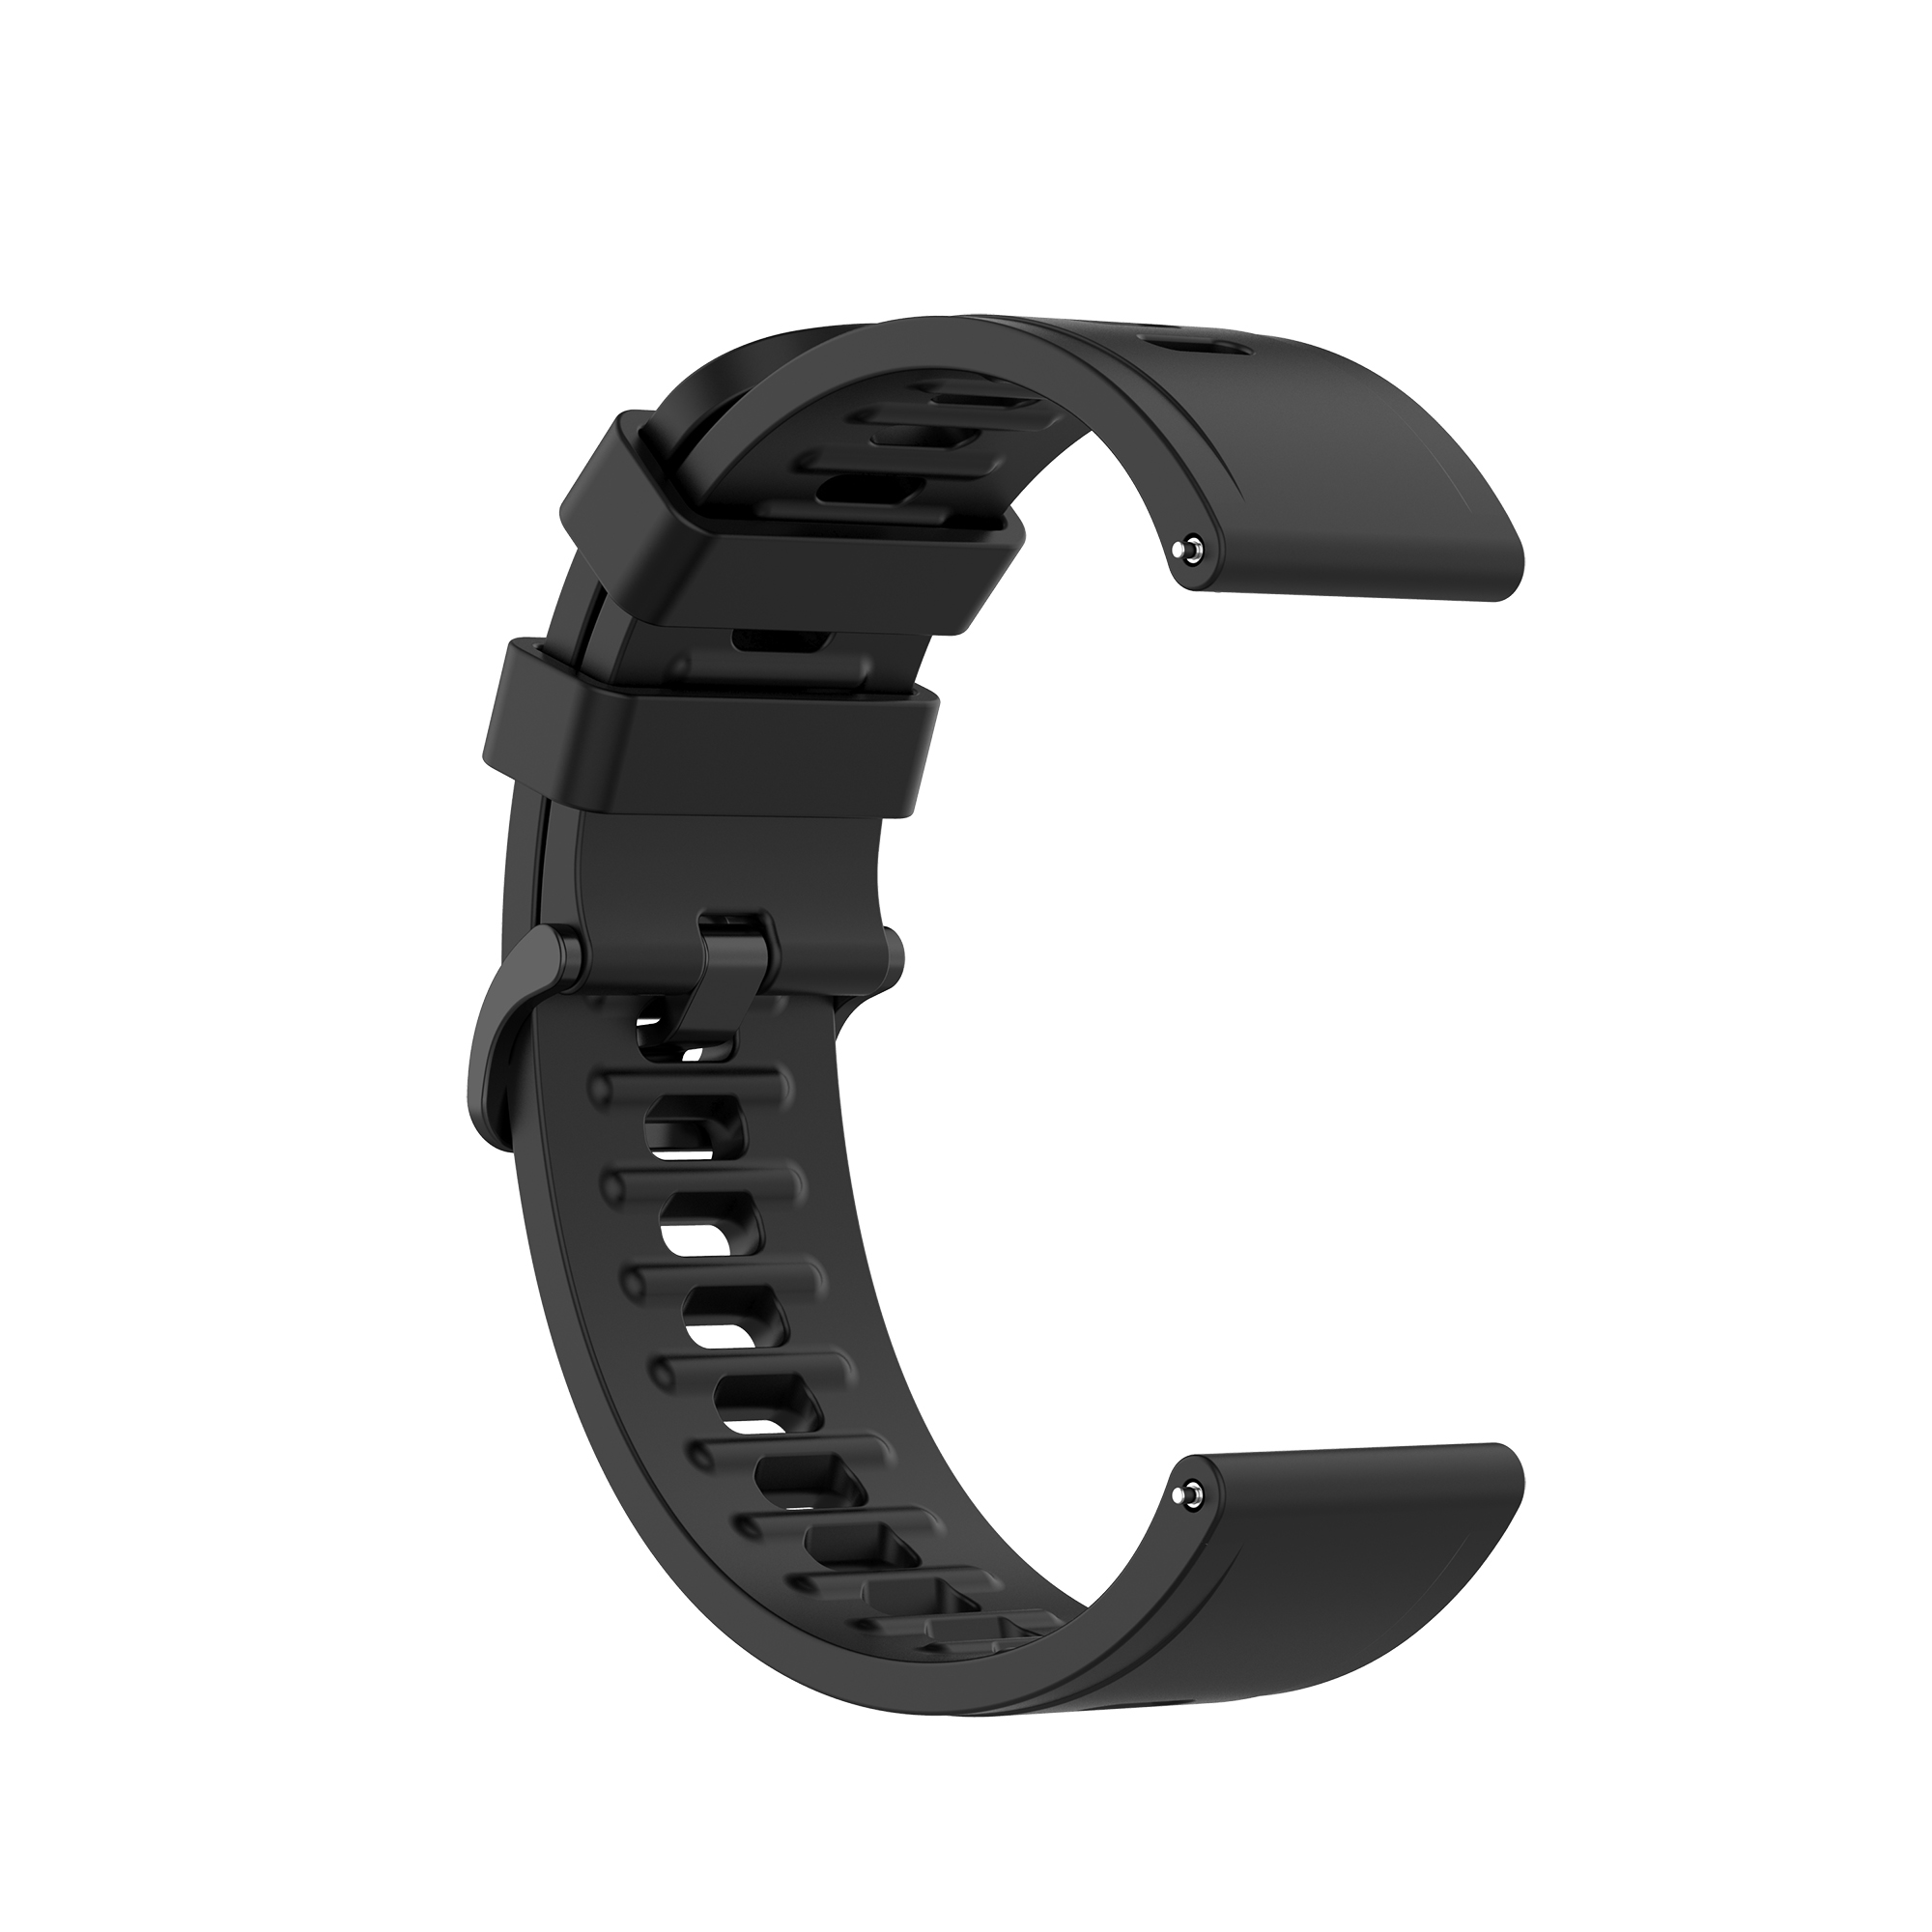 Bakeey-2022mm-Pure-Color-Sweatproof-Soft-Silicone-Watch-Band-Strap-Replacement-for-Garmin-Vivowatch-1773645-7